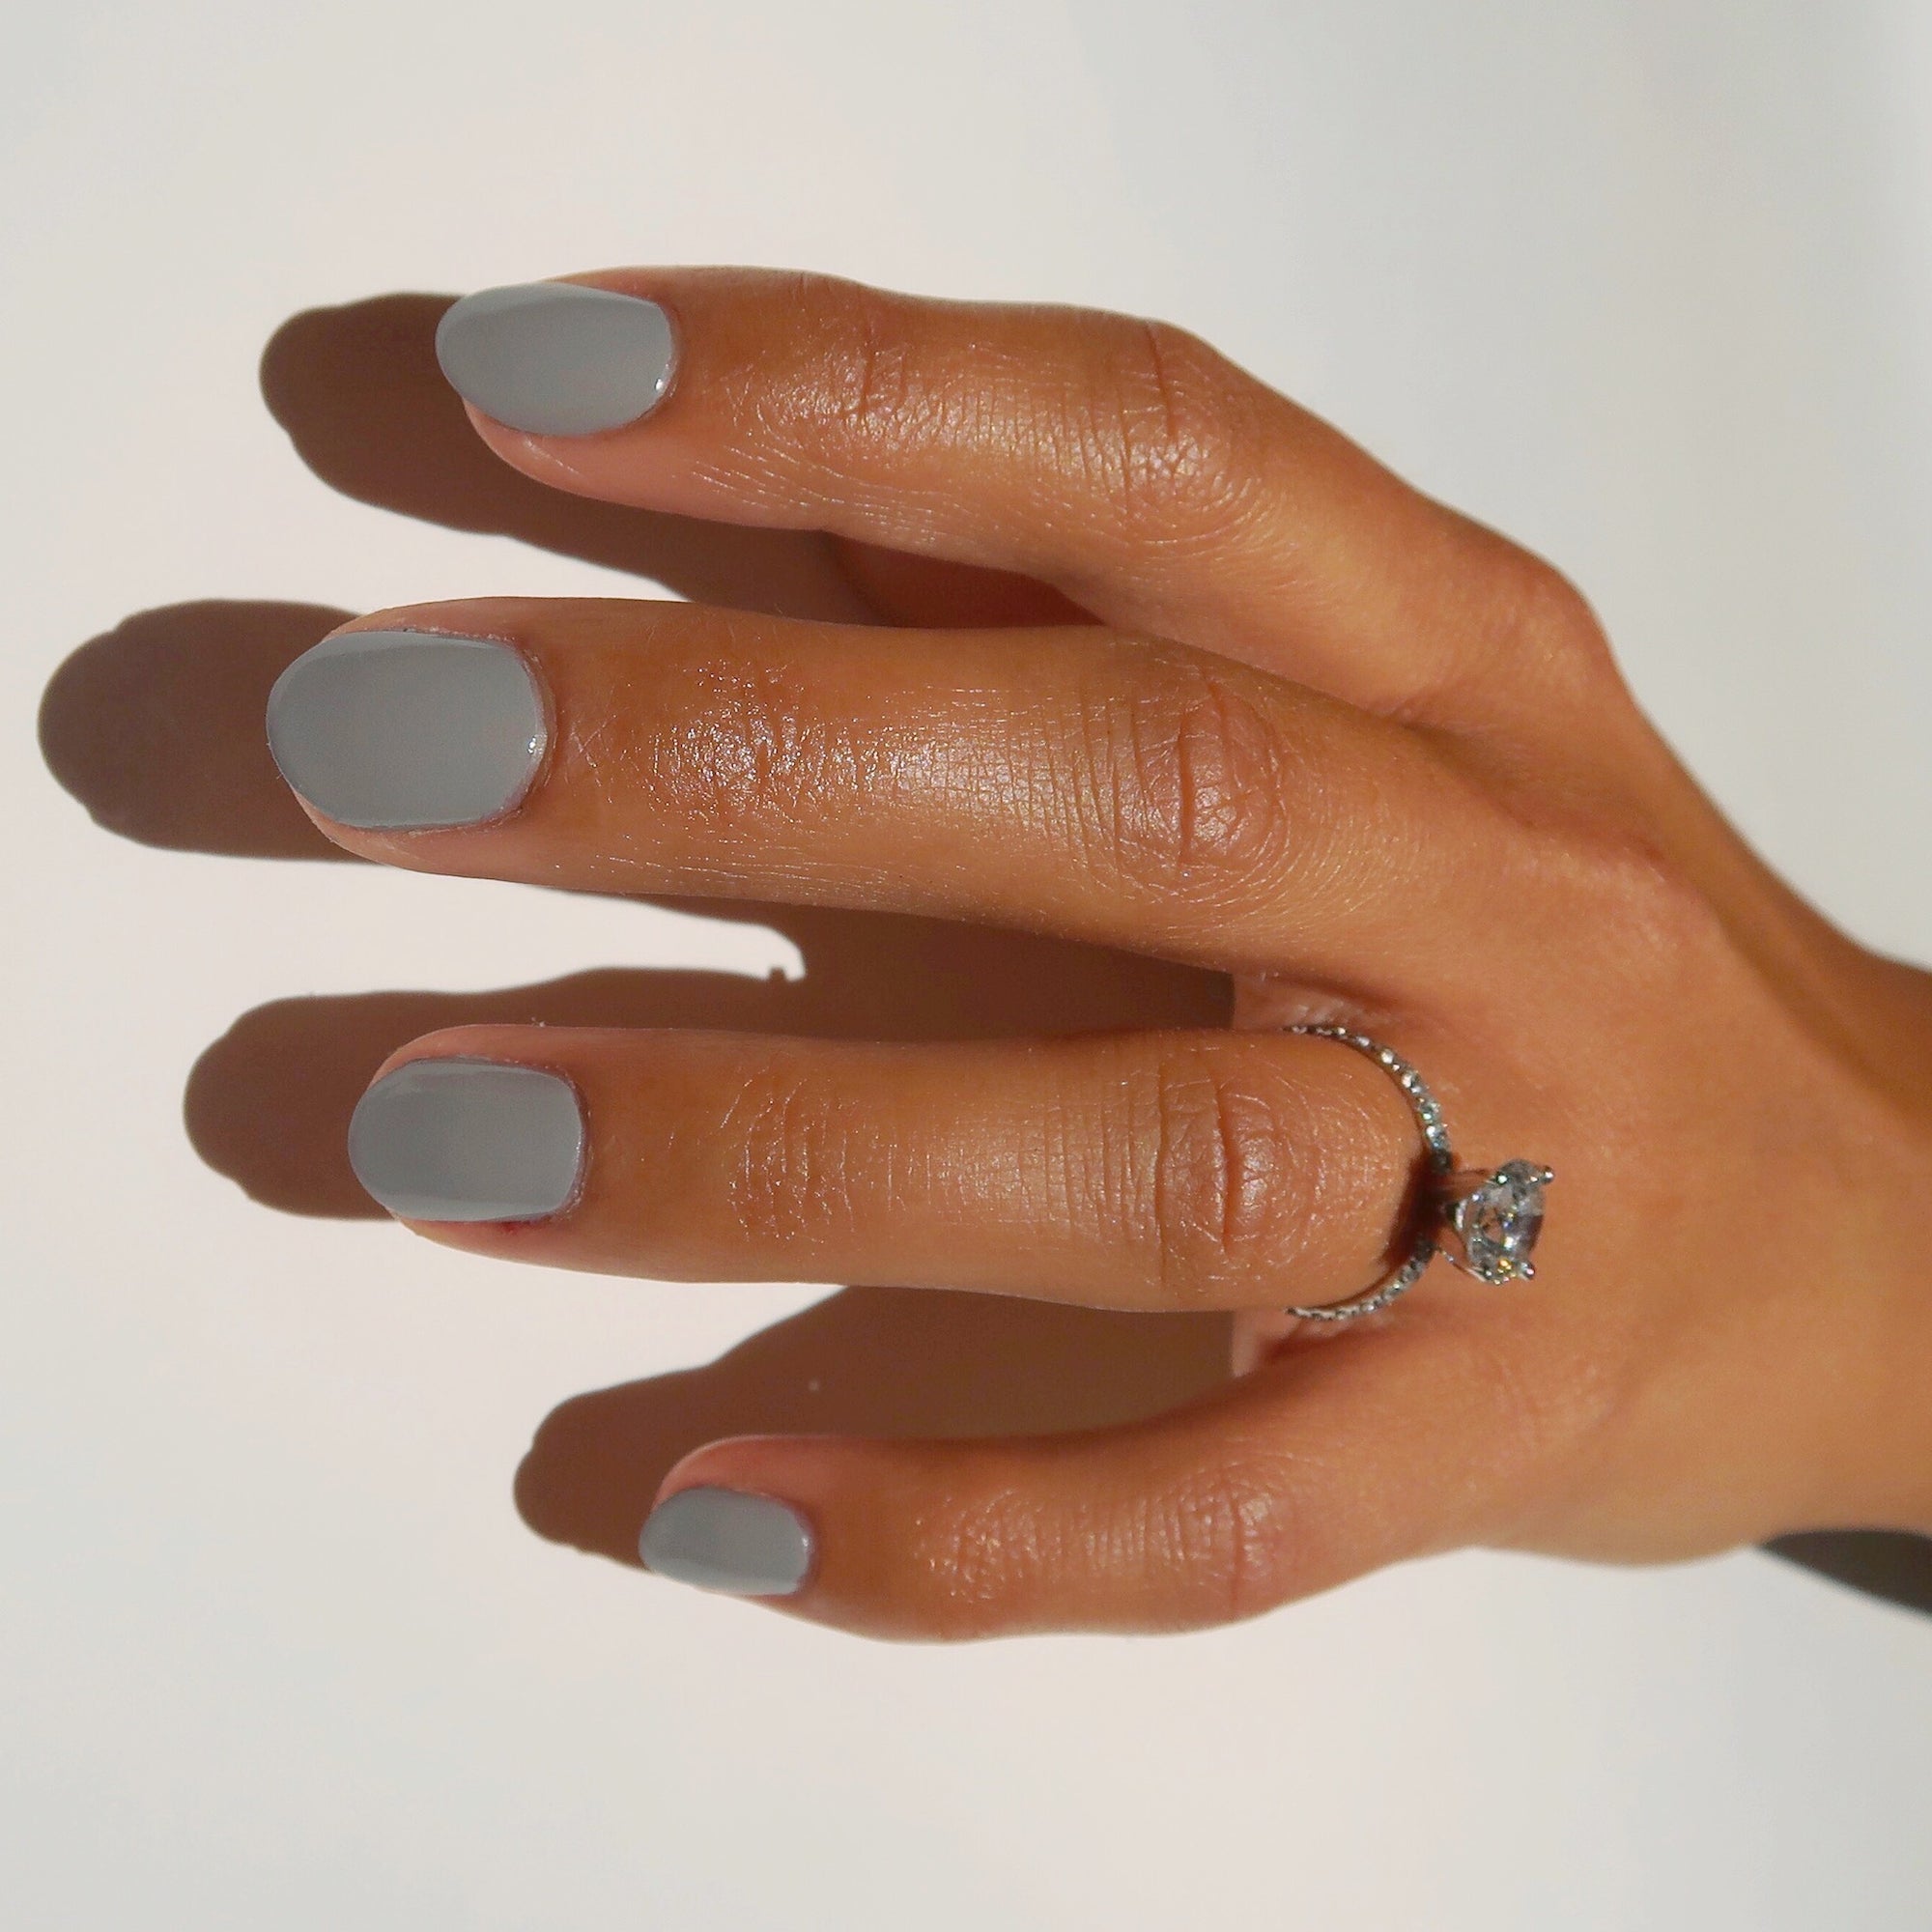 For Flocks Sake is a muted taupe hue, pictured here the single polished hand of a model with squoval shaped nails.  An elegant diamond ring is on her ring finger.  The image is clean and crisp with a white background to support this clean beauty nail polish.